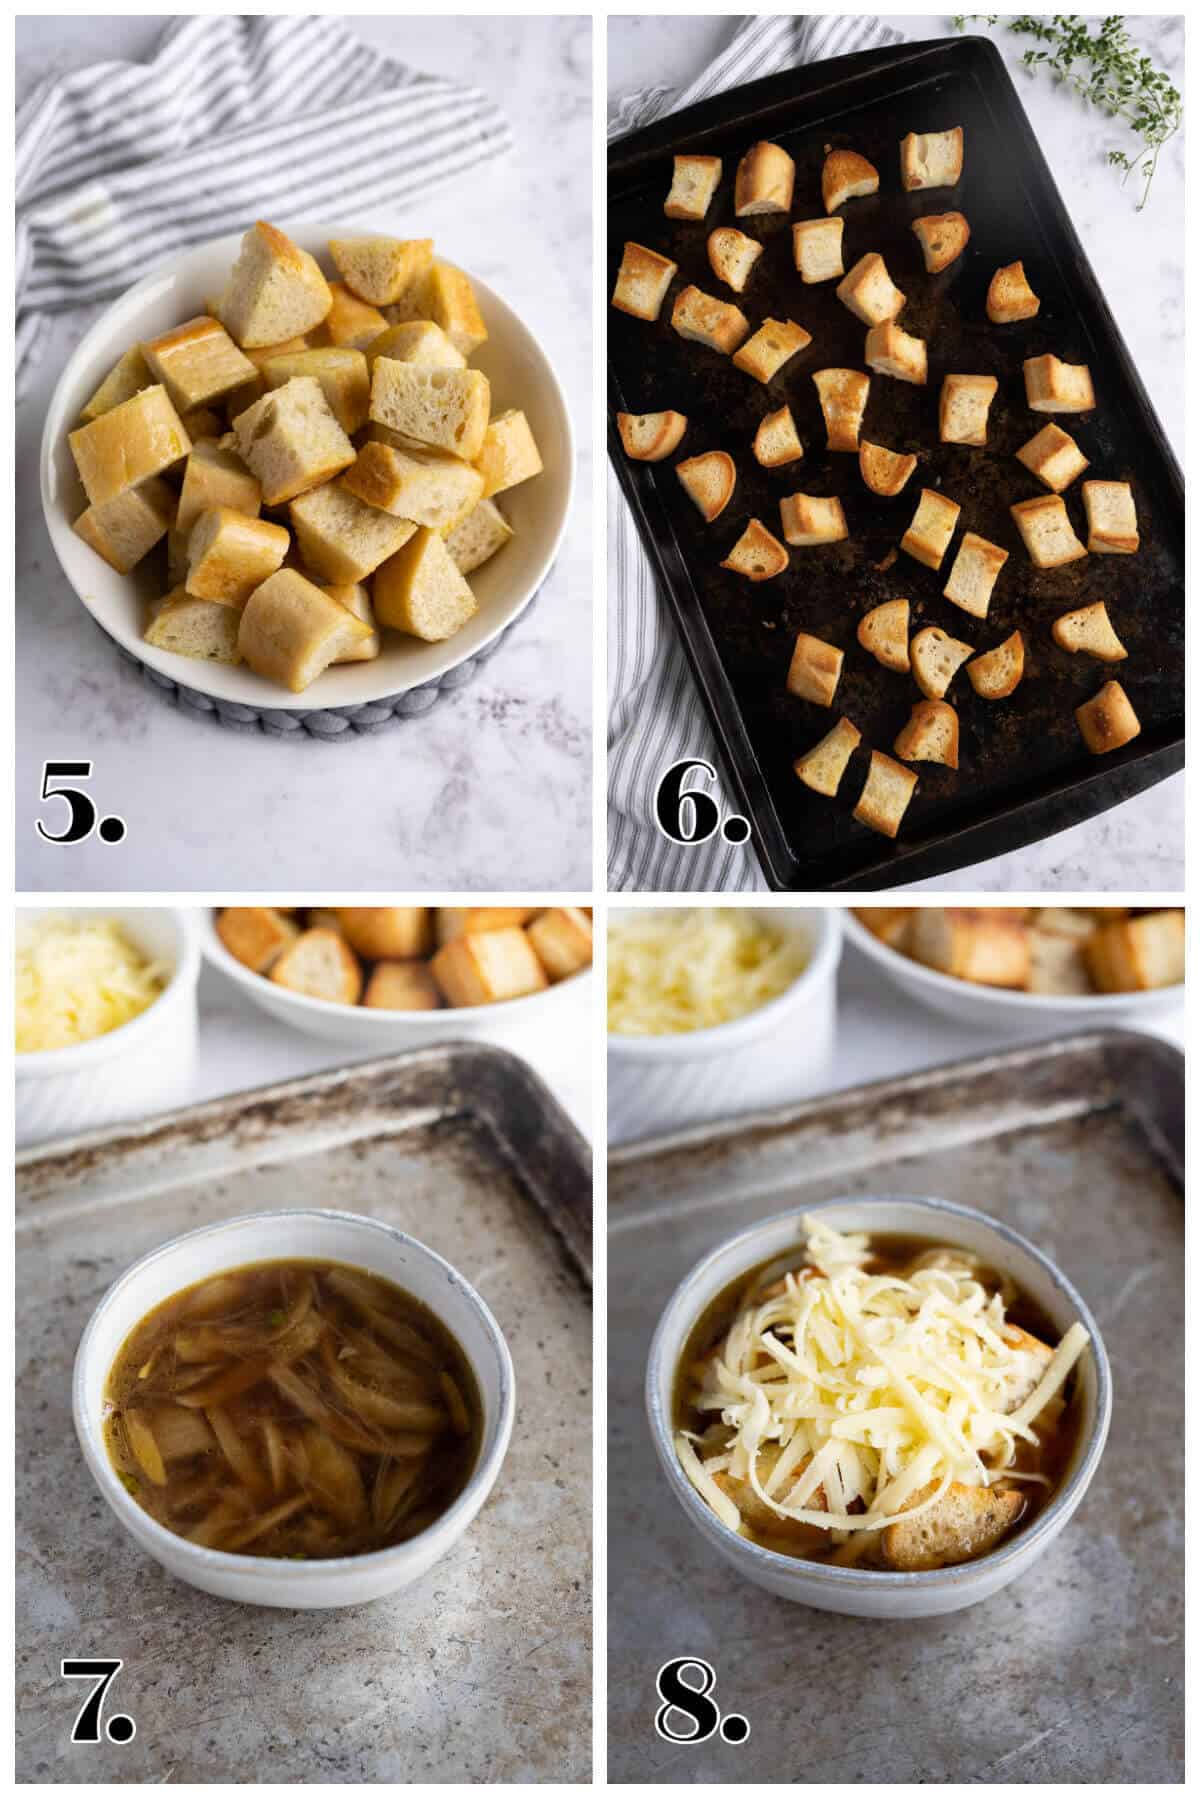 4 image collage showing the steps to finish French onion soup like Panera.